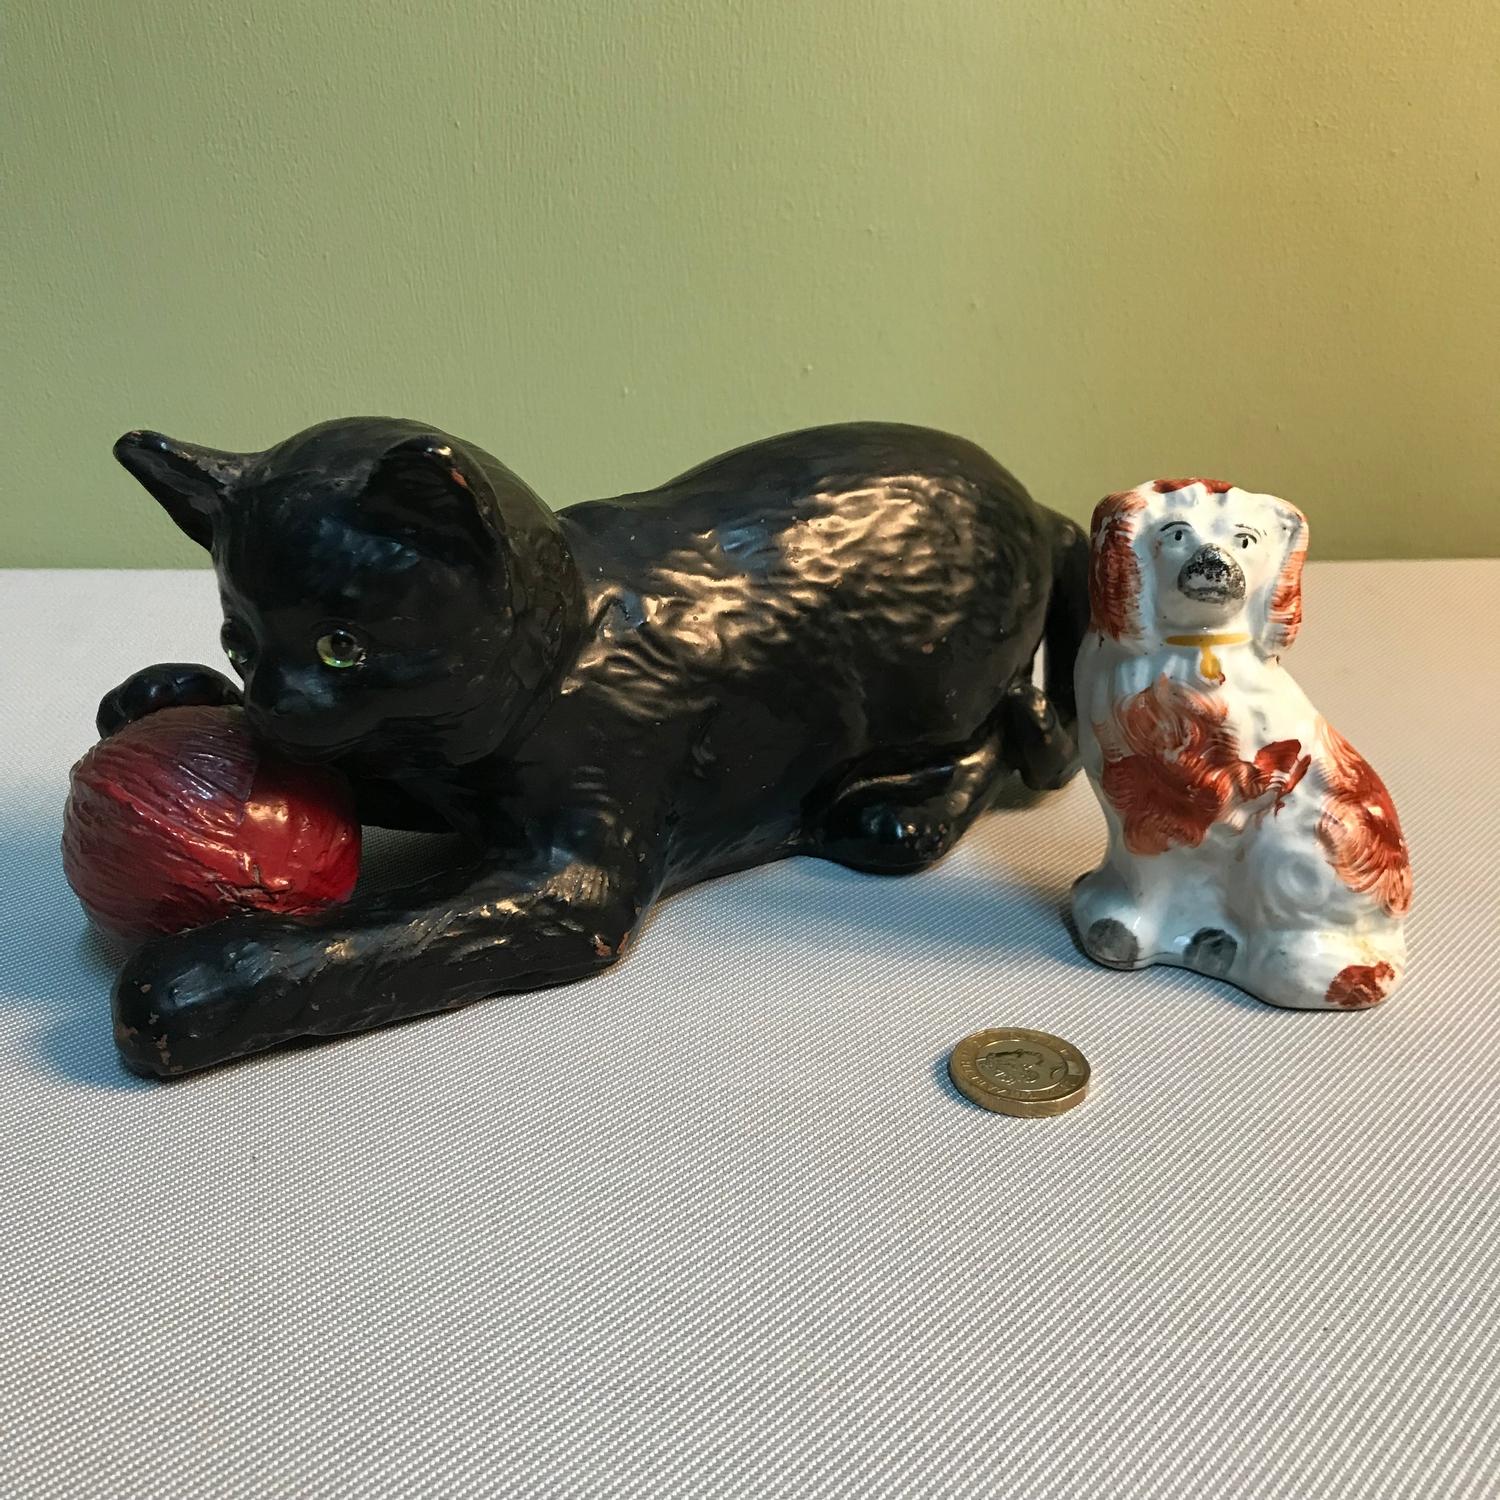 A Vintage Bretby cat and ball figurine together with an antique Staffordshire left wally dog. Cat